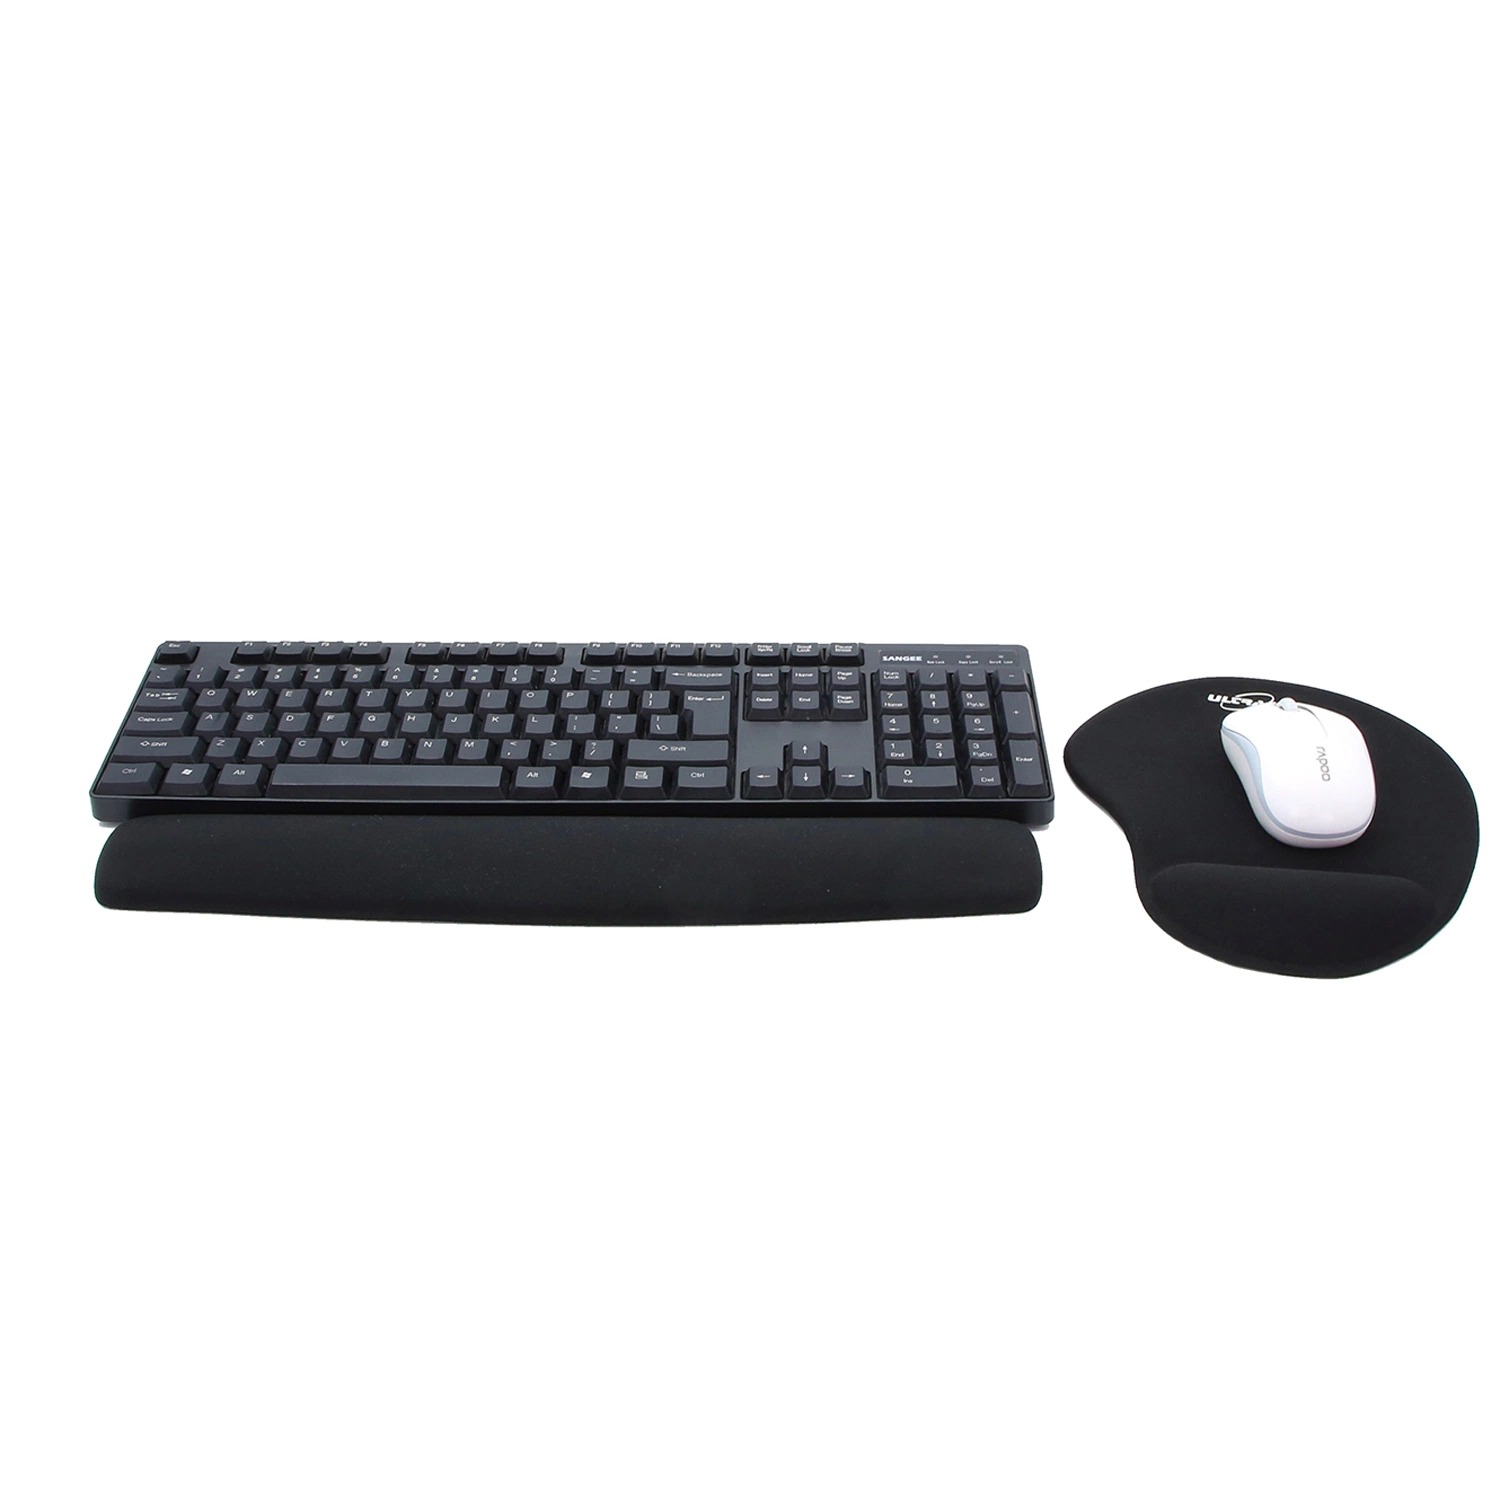 Custom Wrist Rest for Computer Keyboard Support Memory Foam Set Mouse Pad